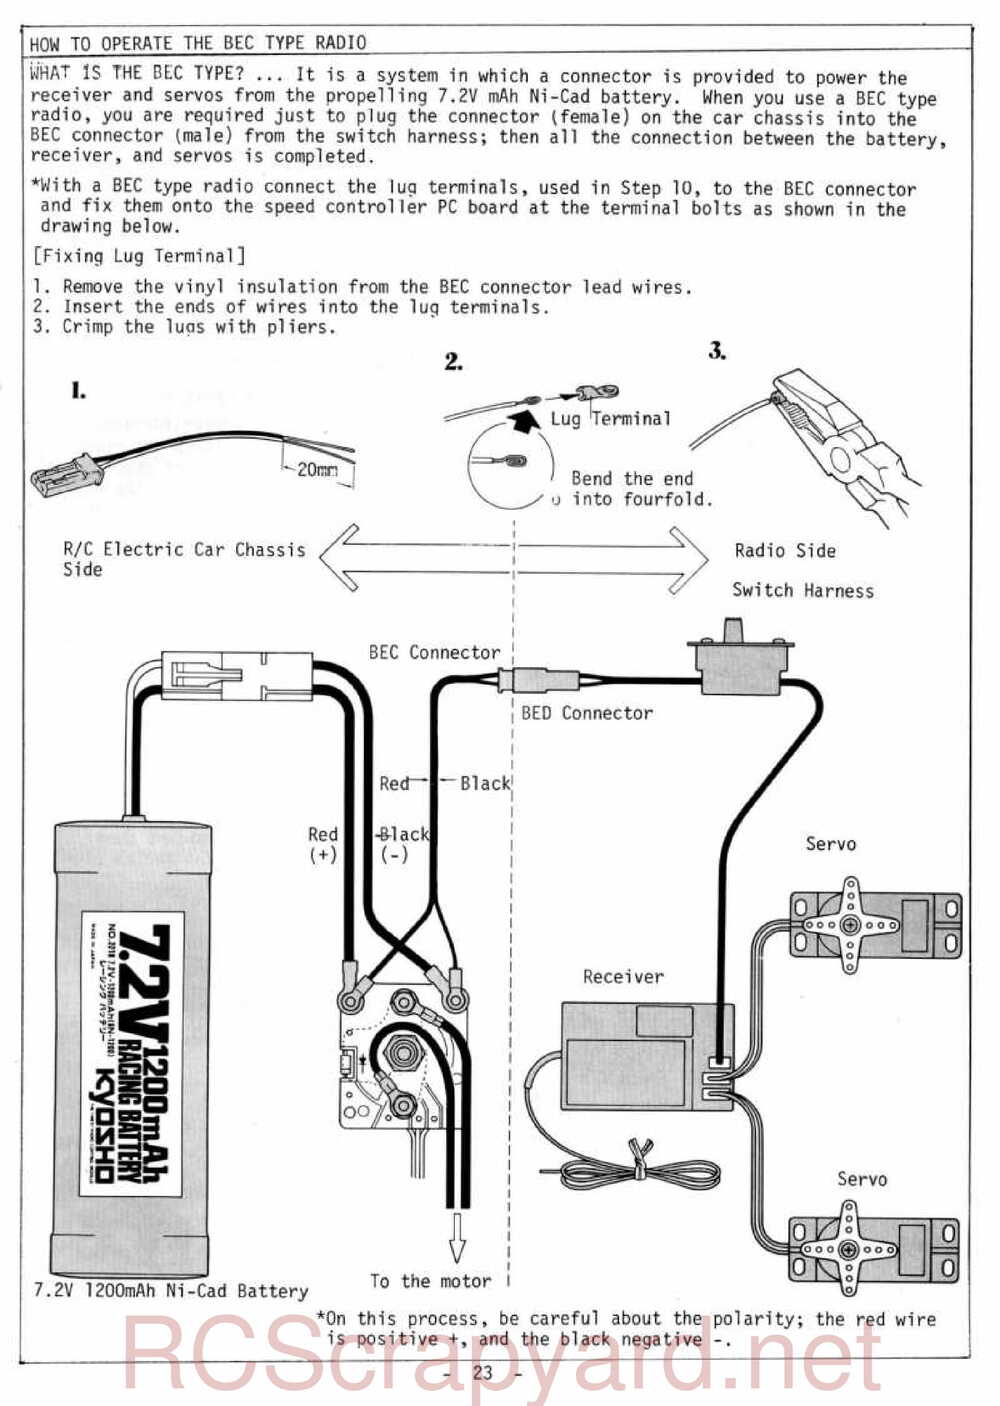 Kyosho - 3069 - Gallop MkII - Manual - Page 23